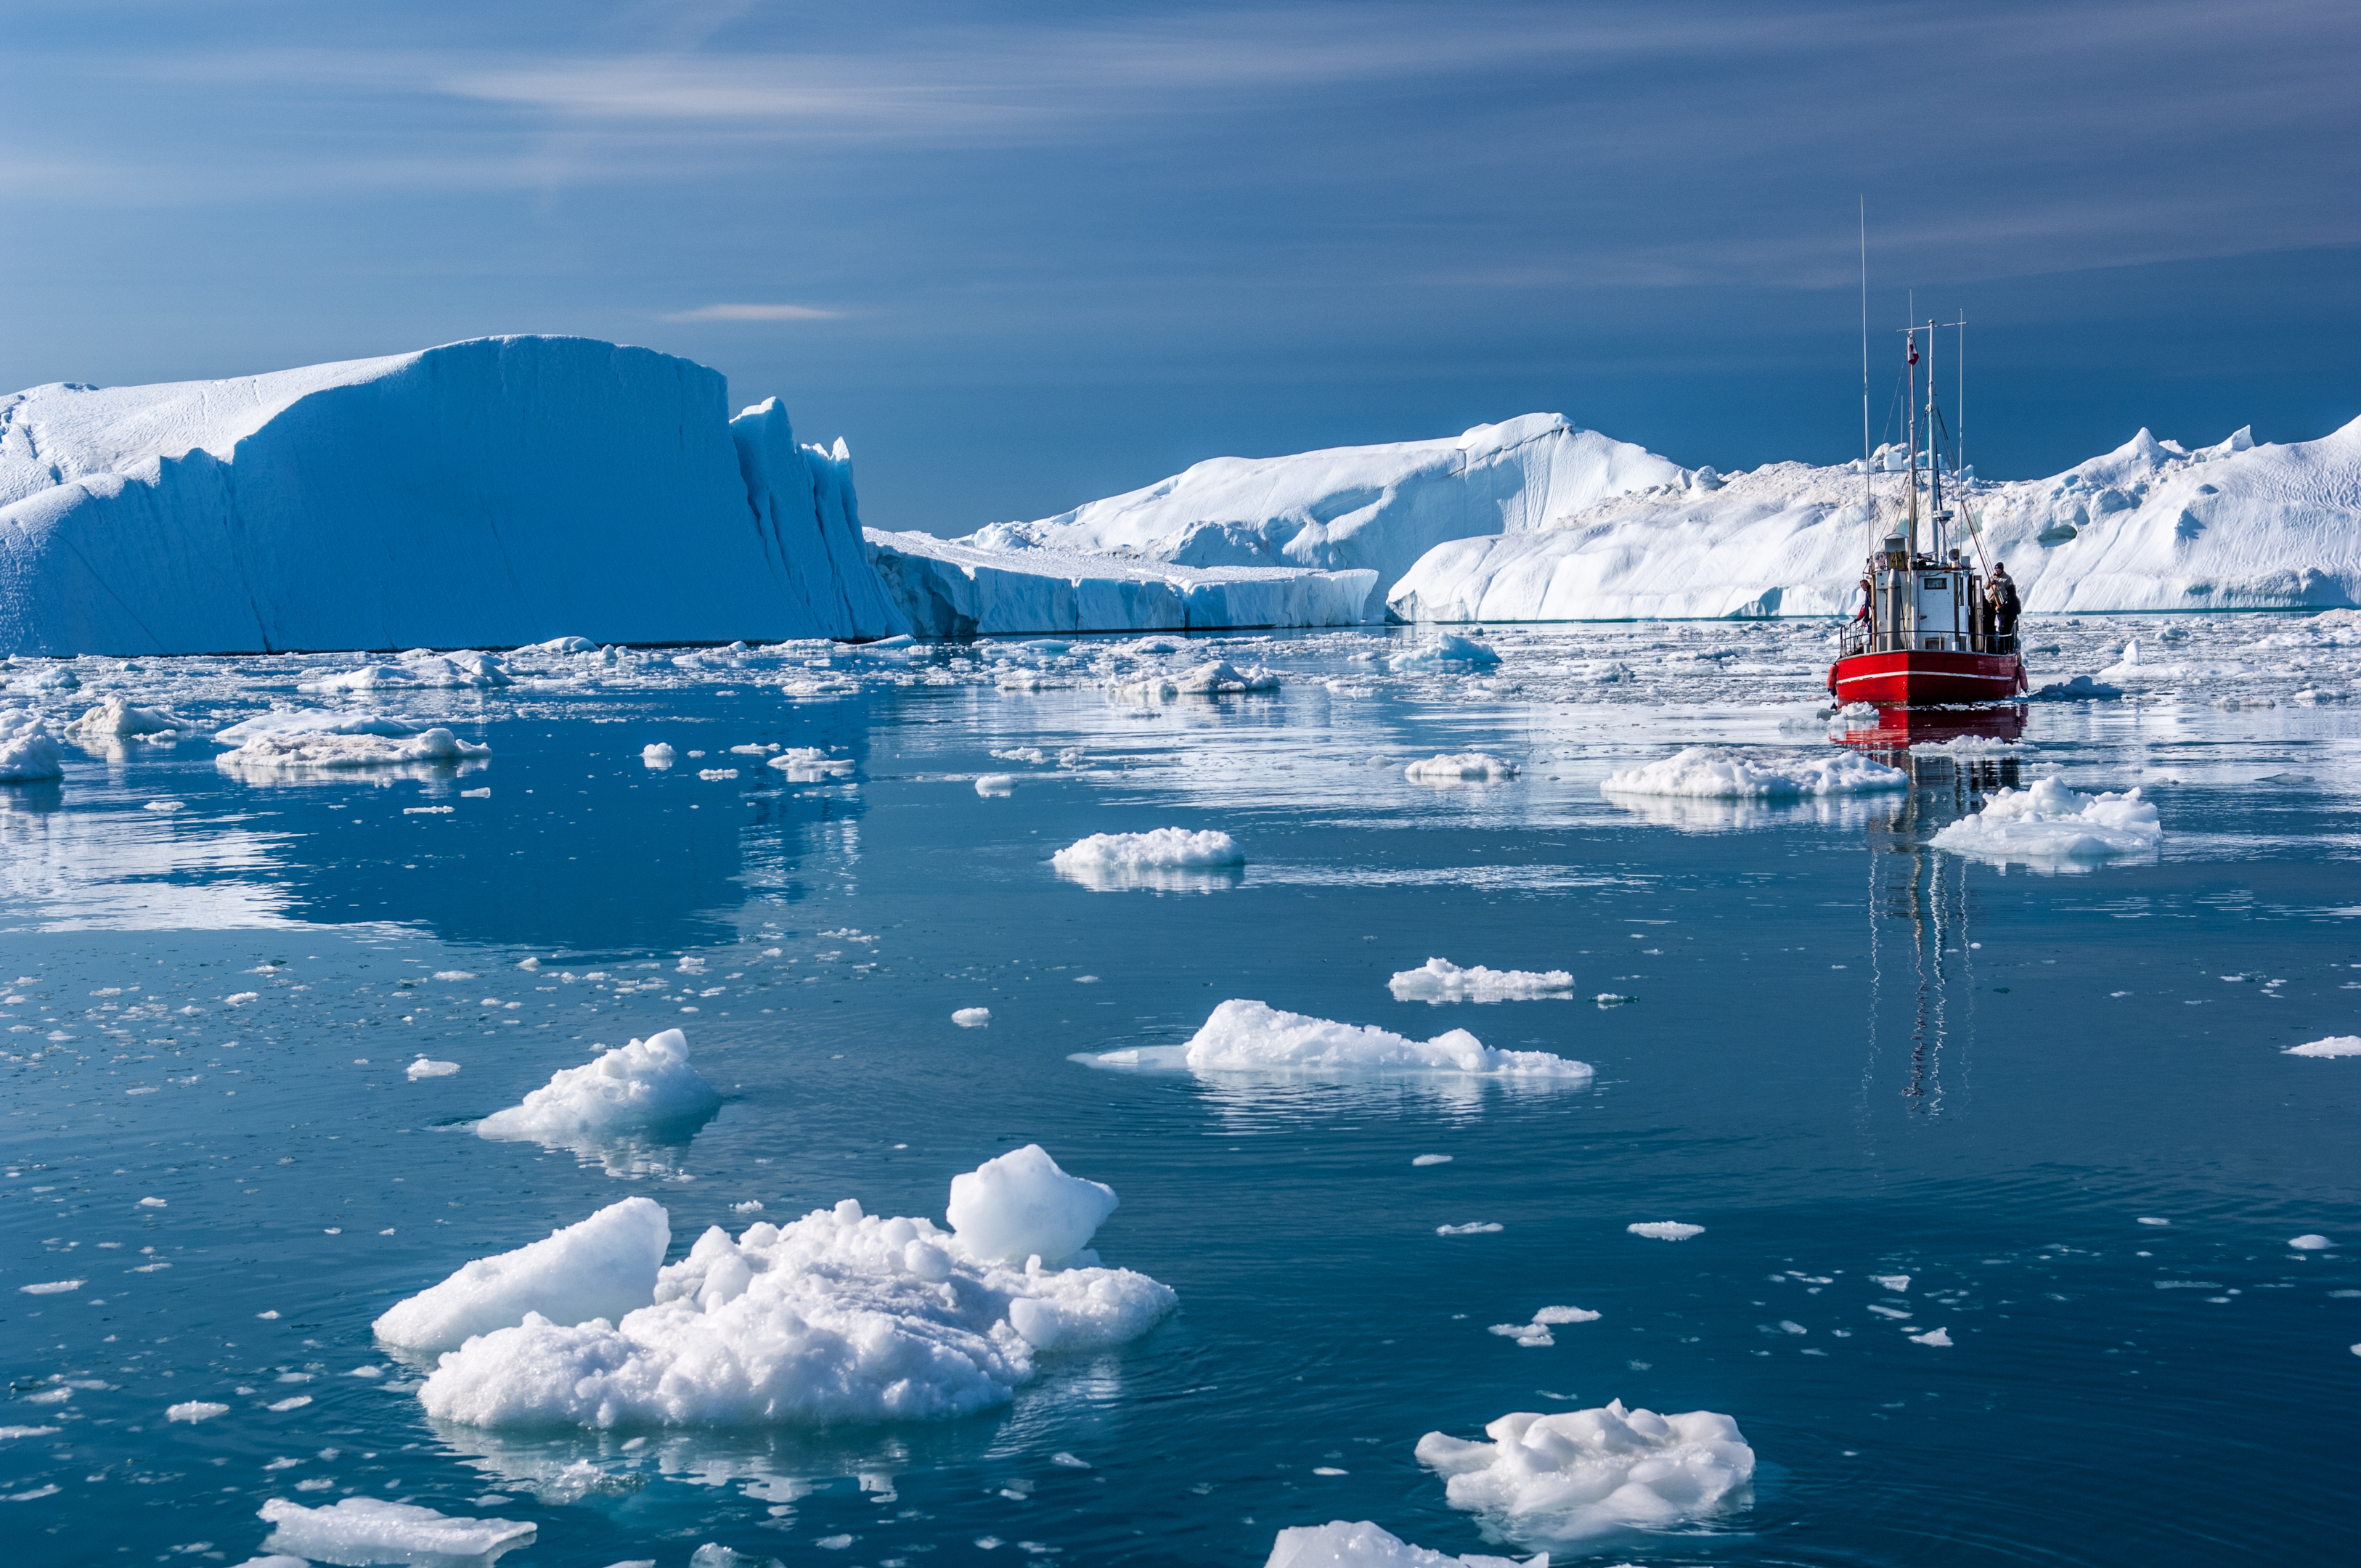 Fishing boat amongst ice bergs in Greenland